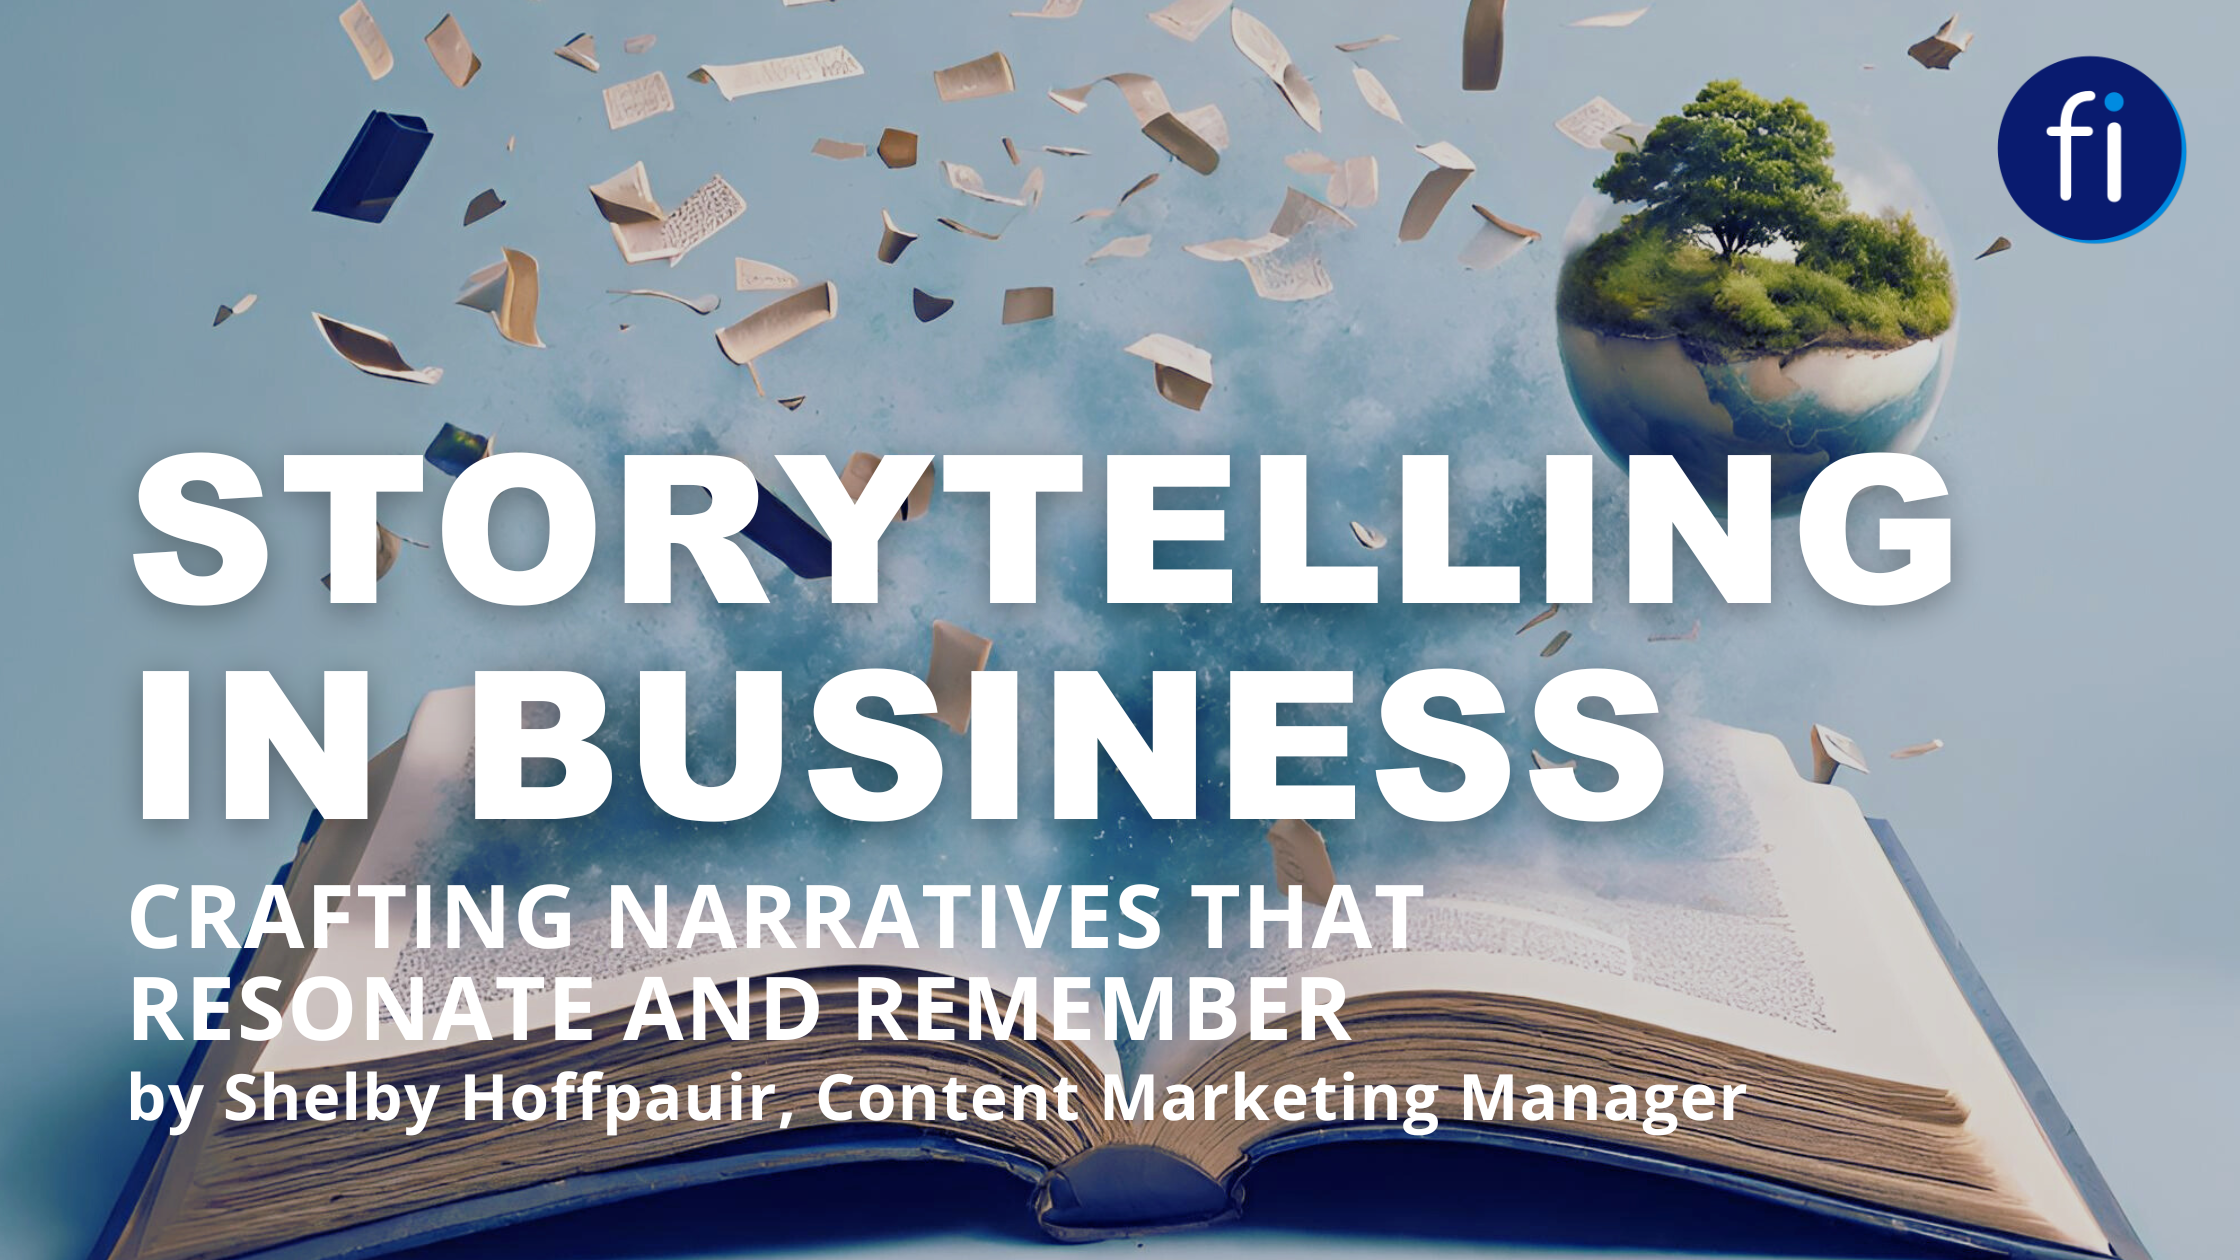 Storytelling in Business: Crafting Narratives that Resonate and Remember